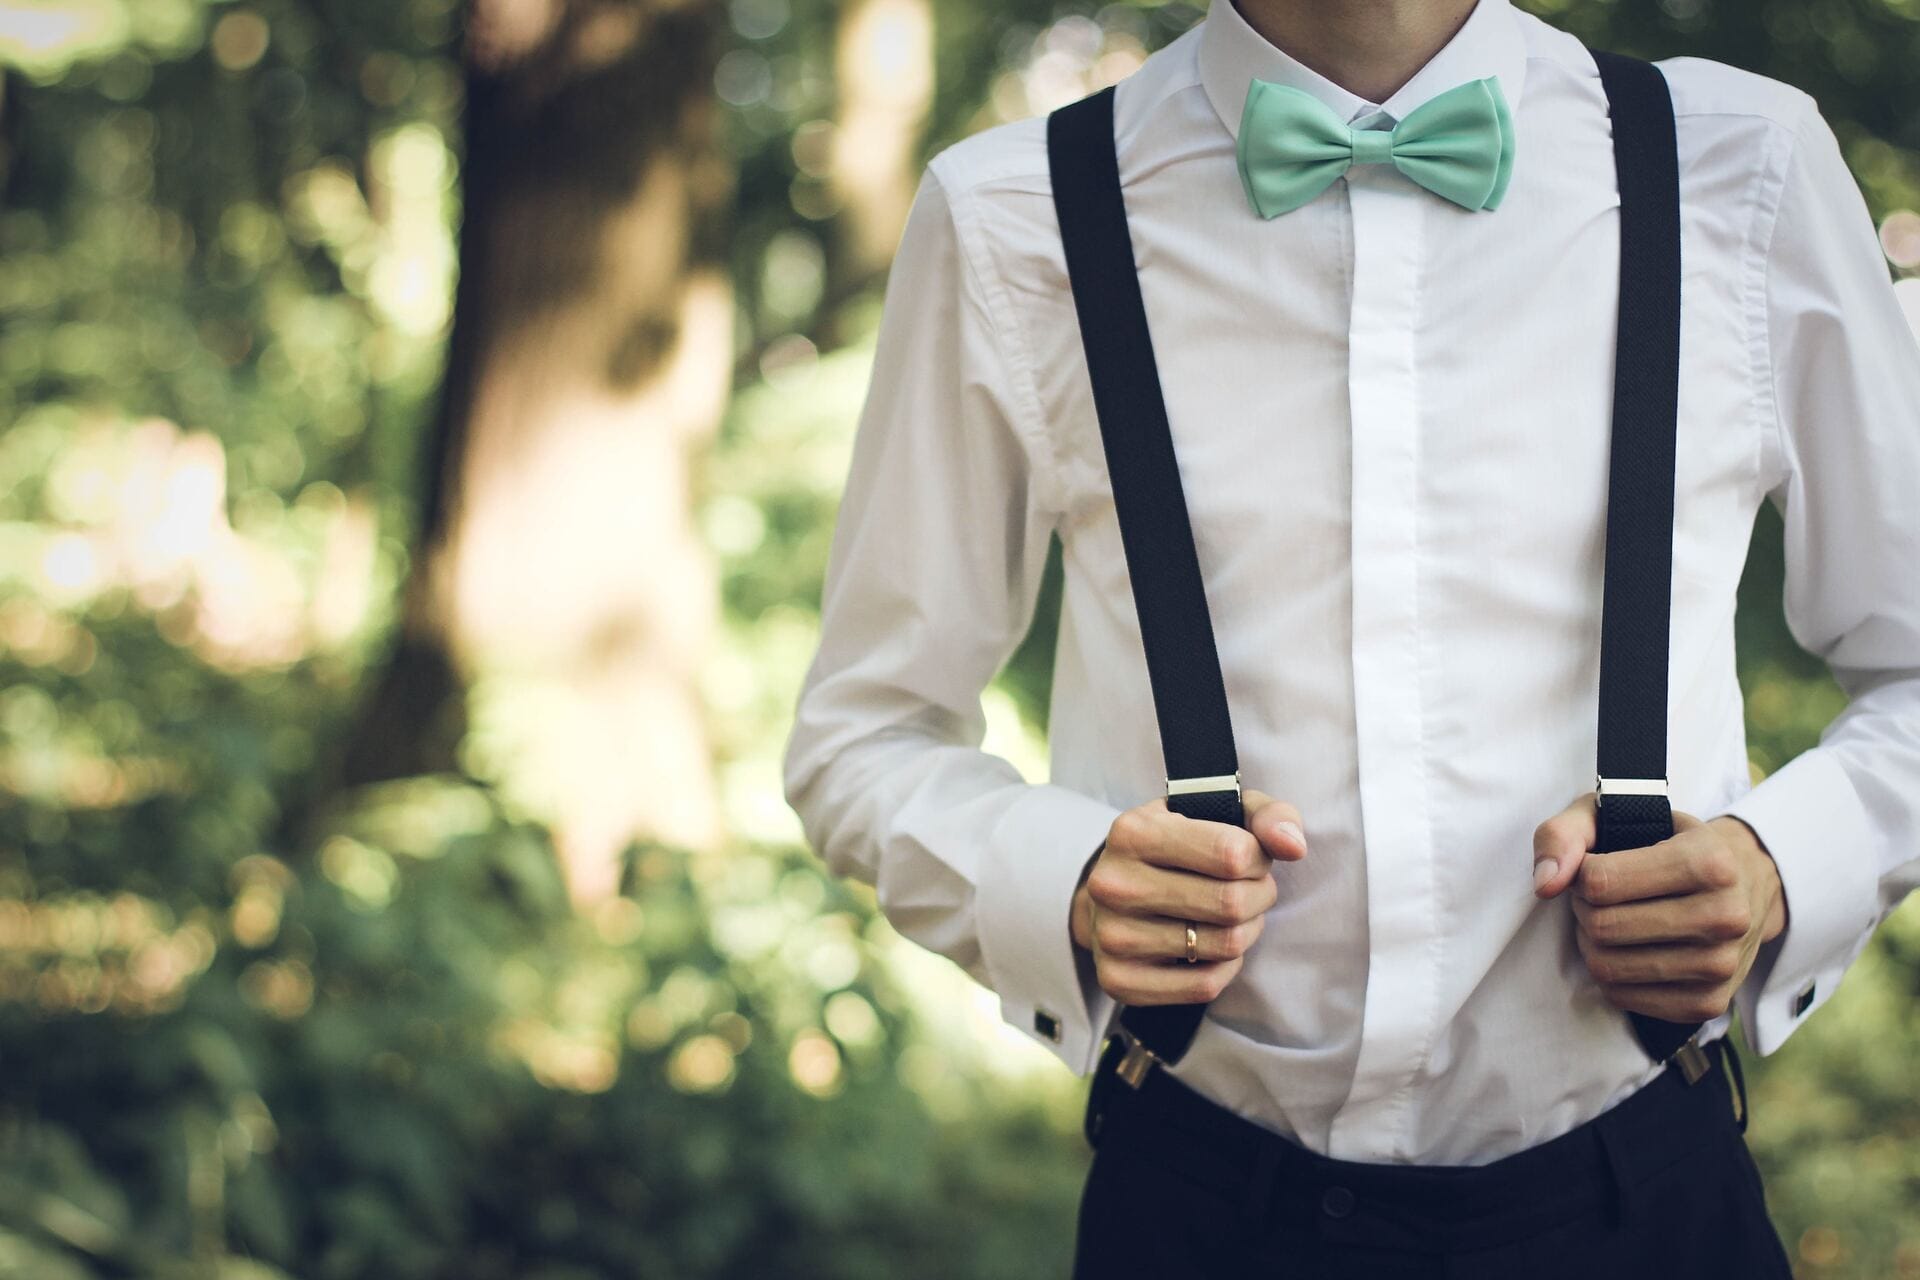 How to Be a Great Groomsman